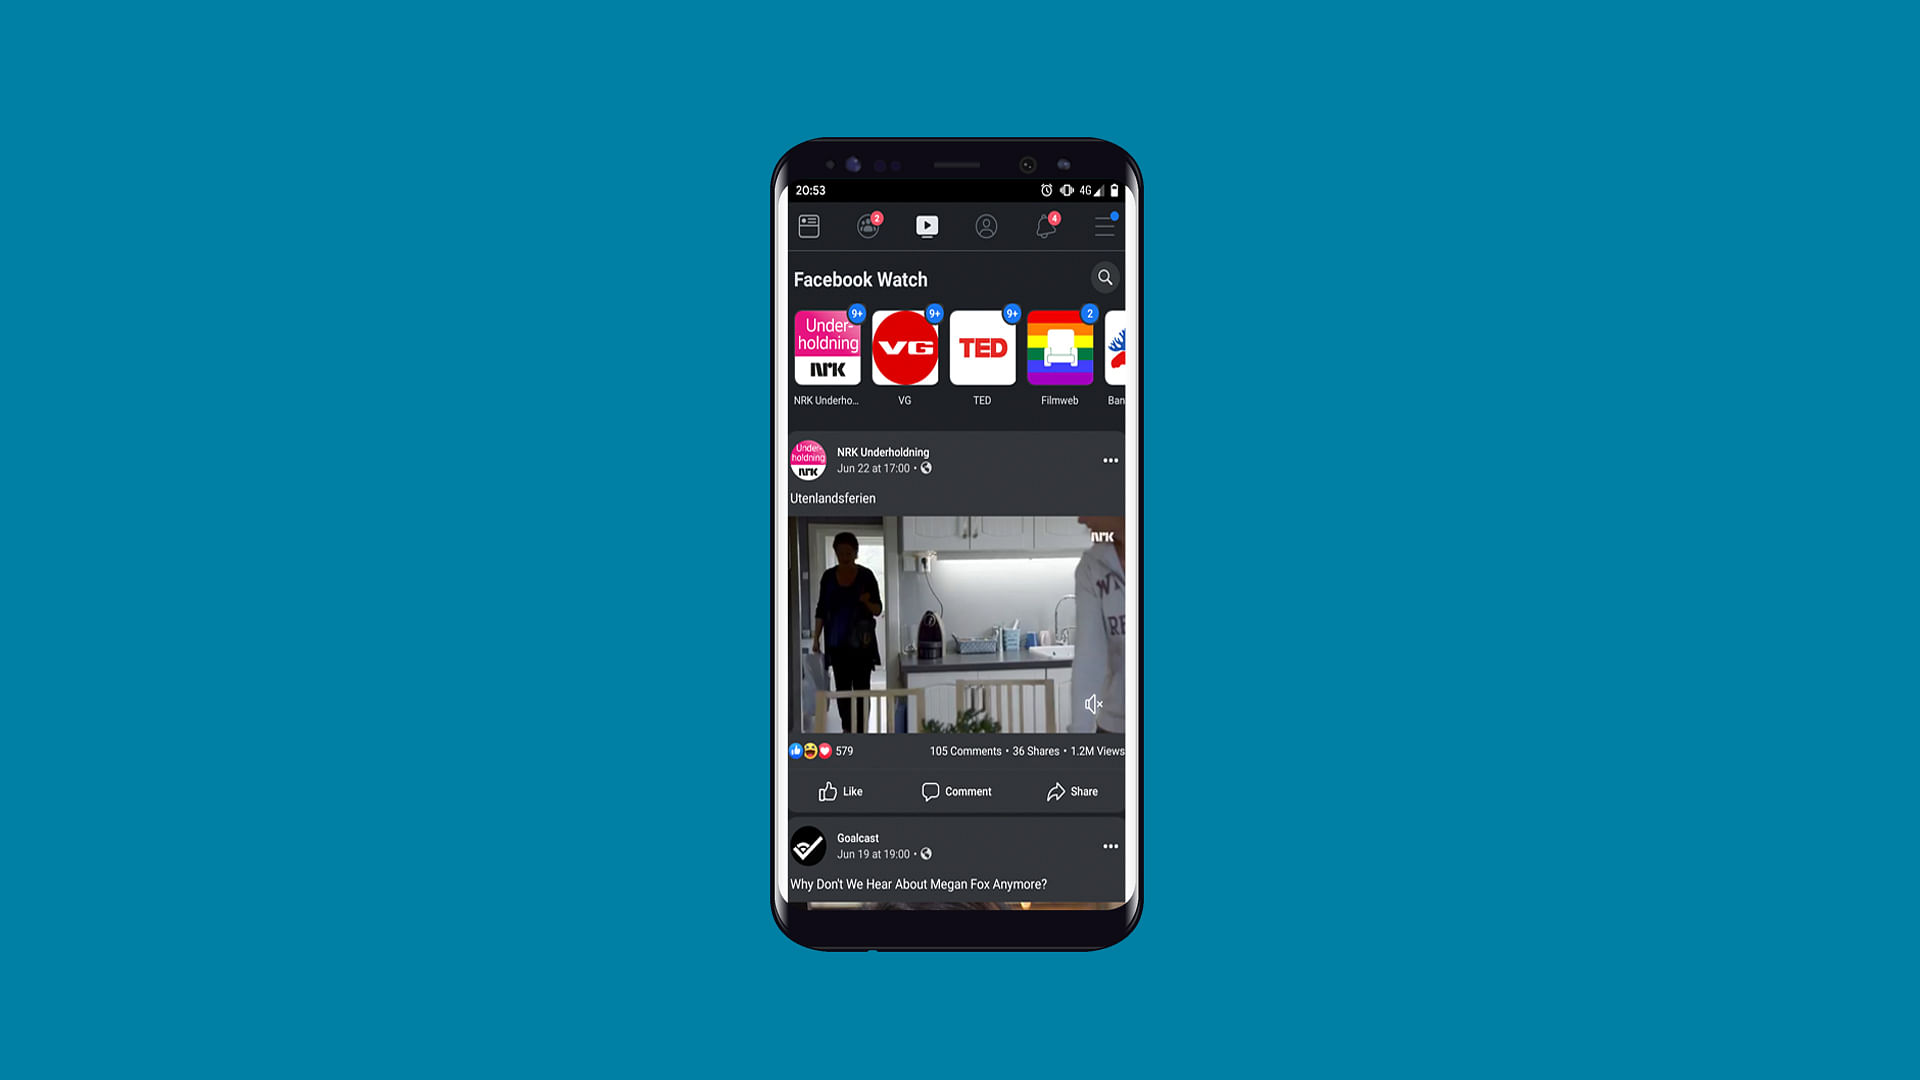 Facebook is set to launch the Dark Mode for the mobile version of its app.